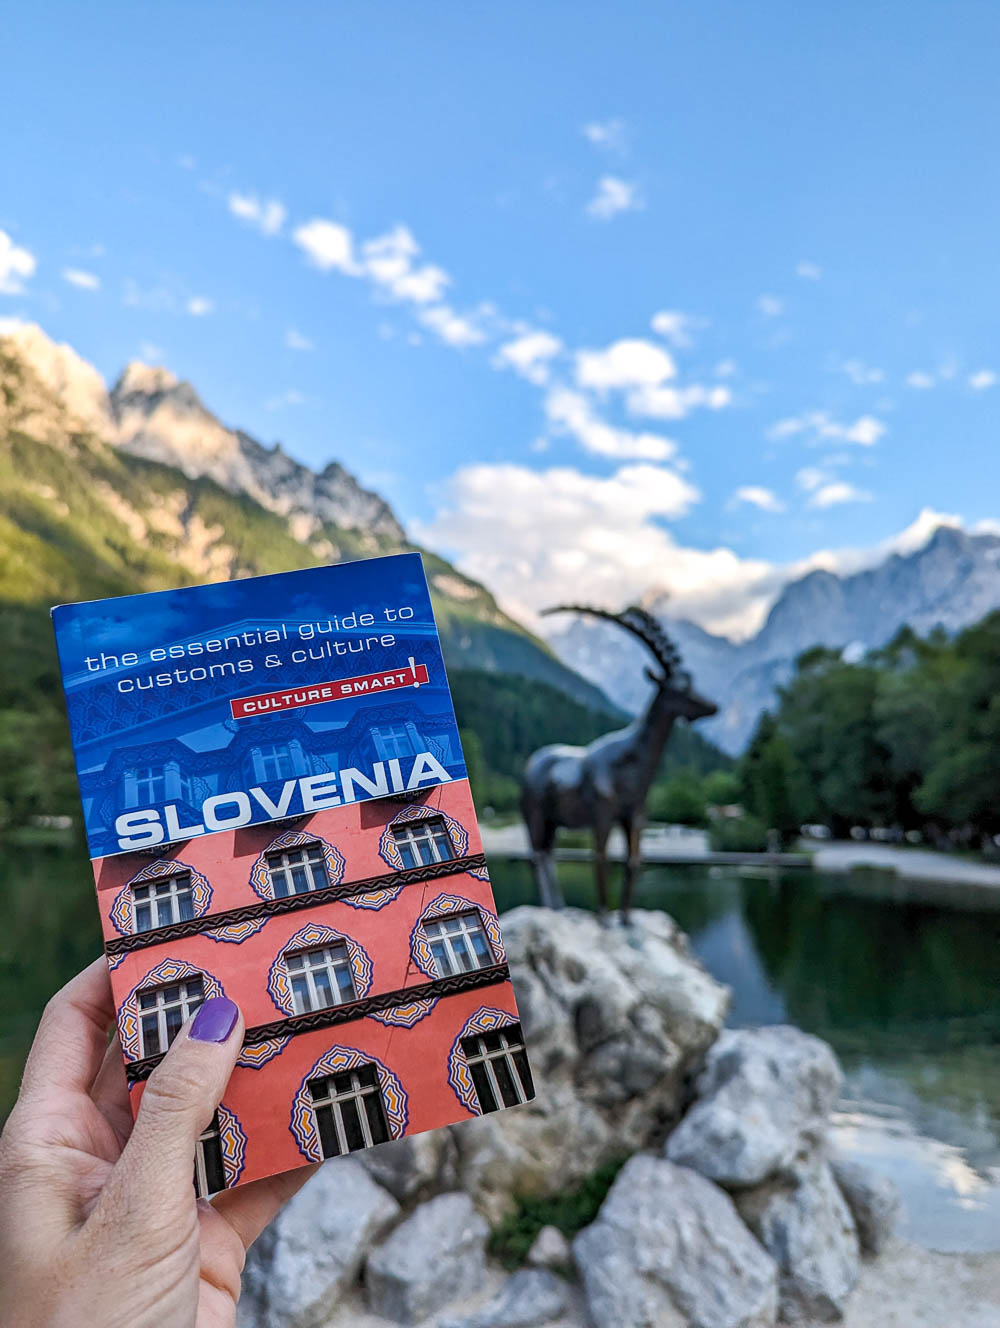 hand holding a slovenia guidebook in front of a statue of an ibex in the mountains